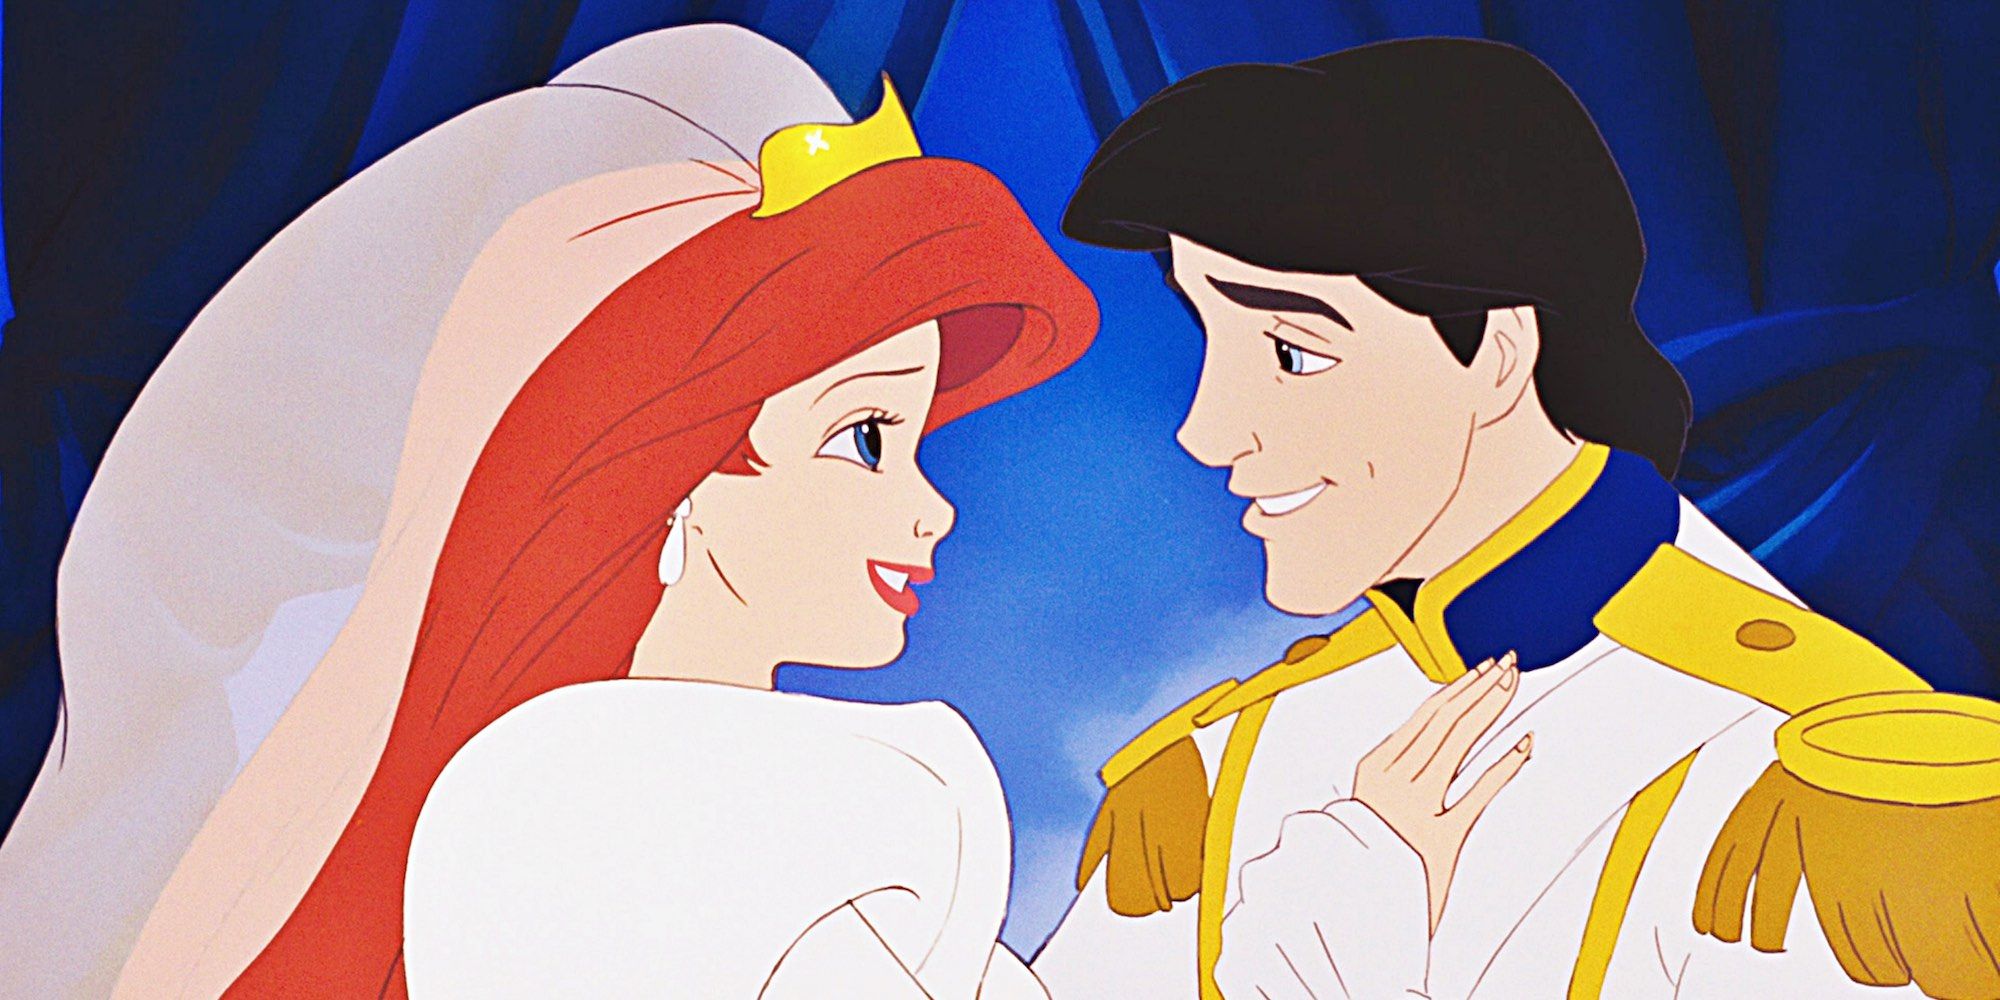 Ariel and Eric's wedding in Disney's The Little Mermaid animated movie